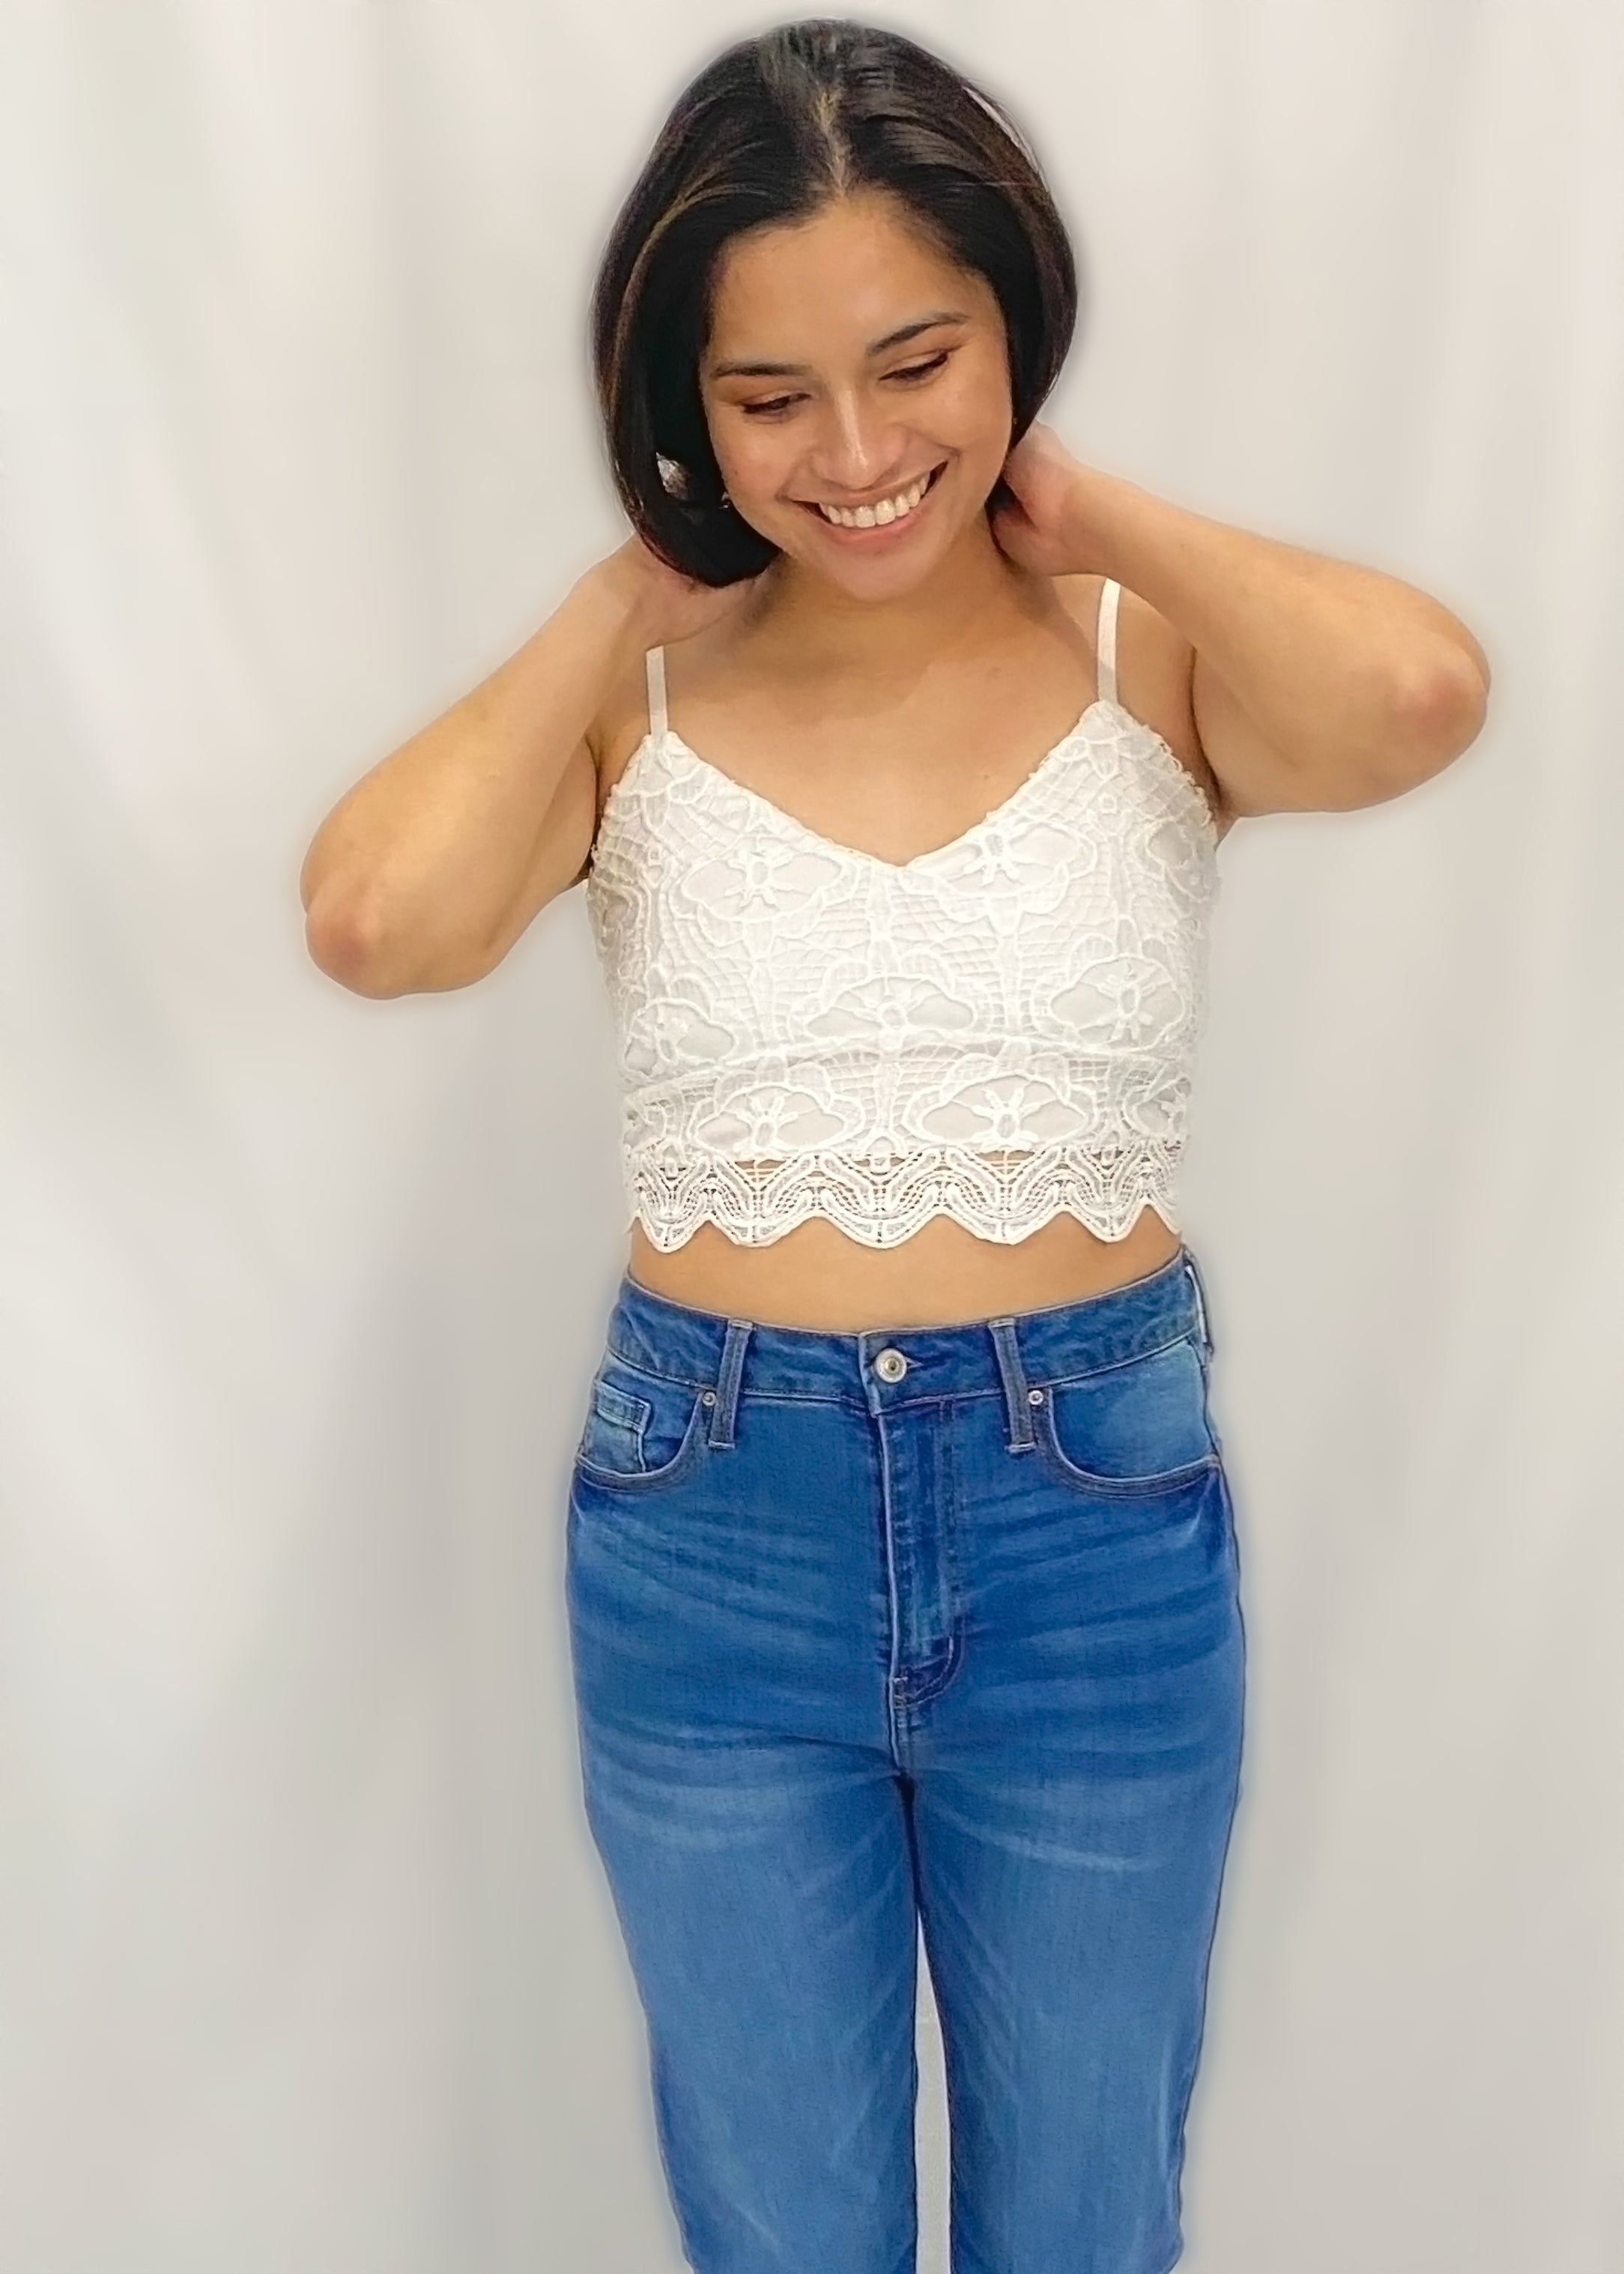 Modest Lacey Cropped Cami in White - JamieRose & Co.